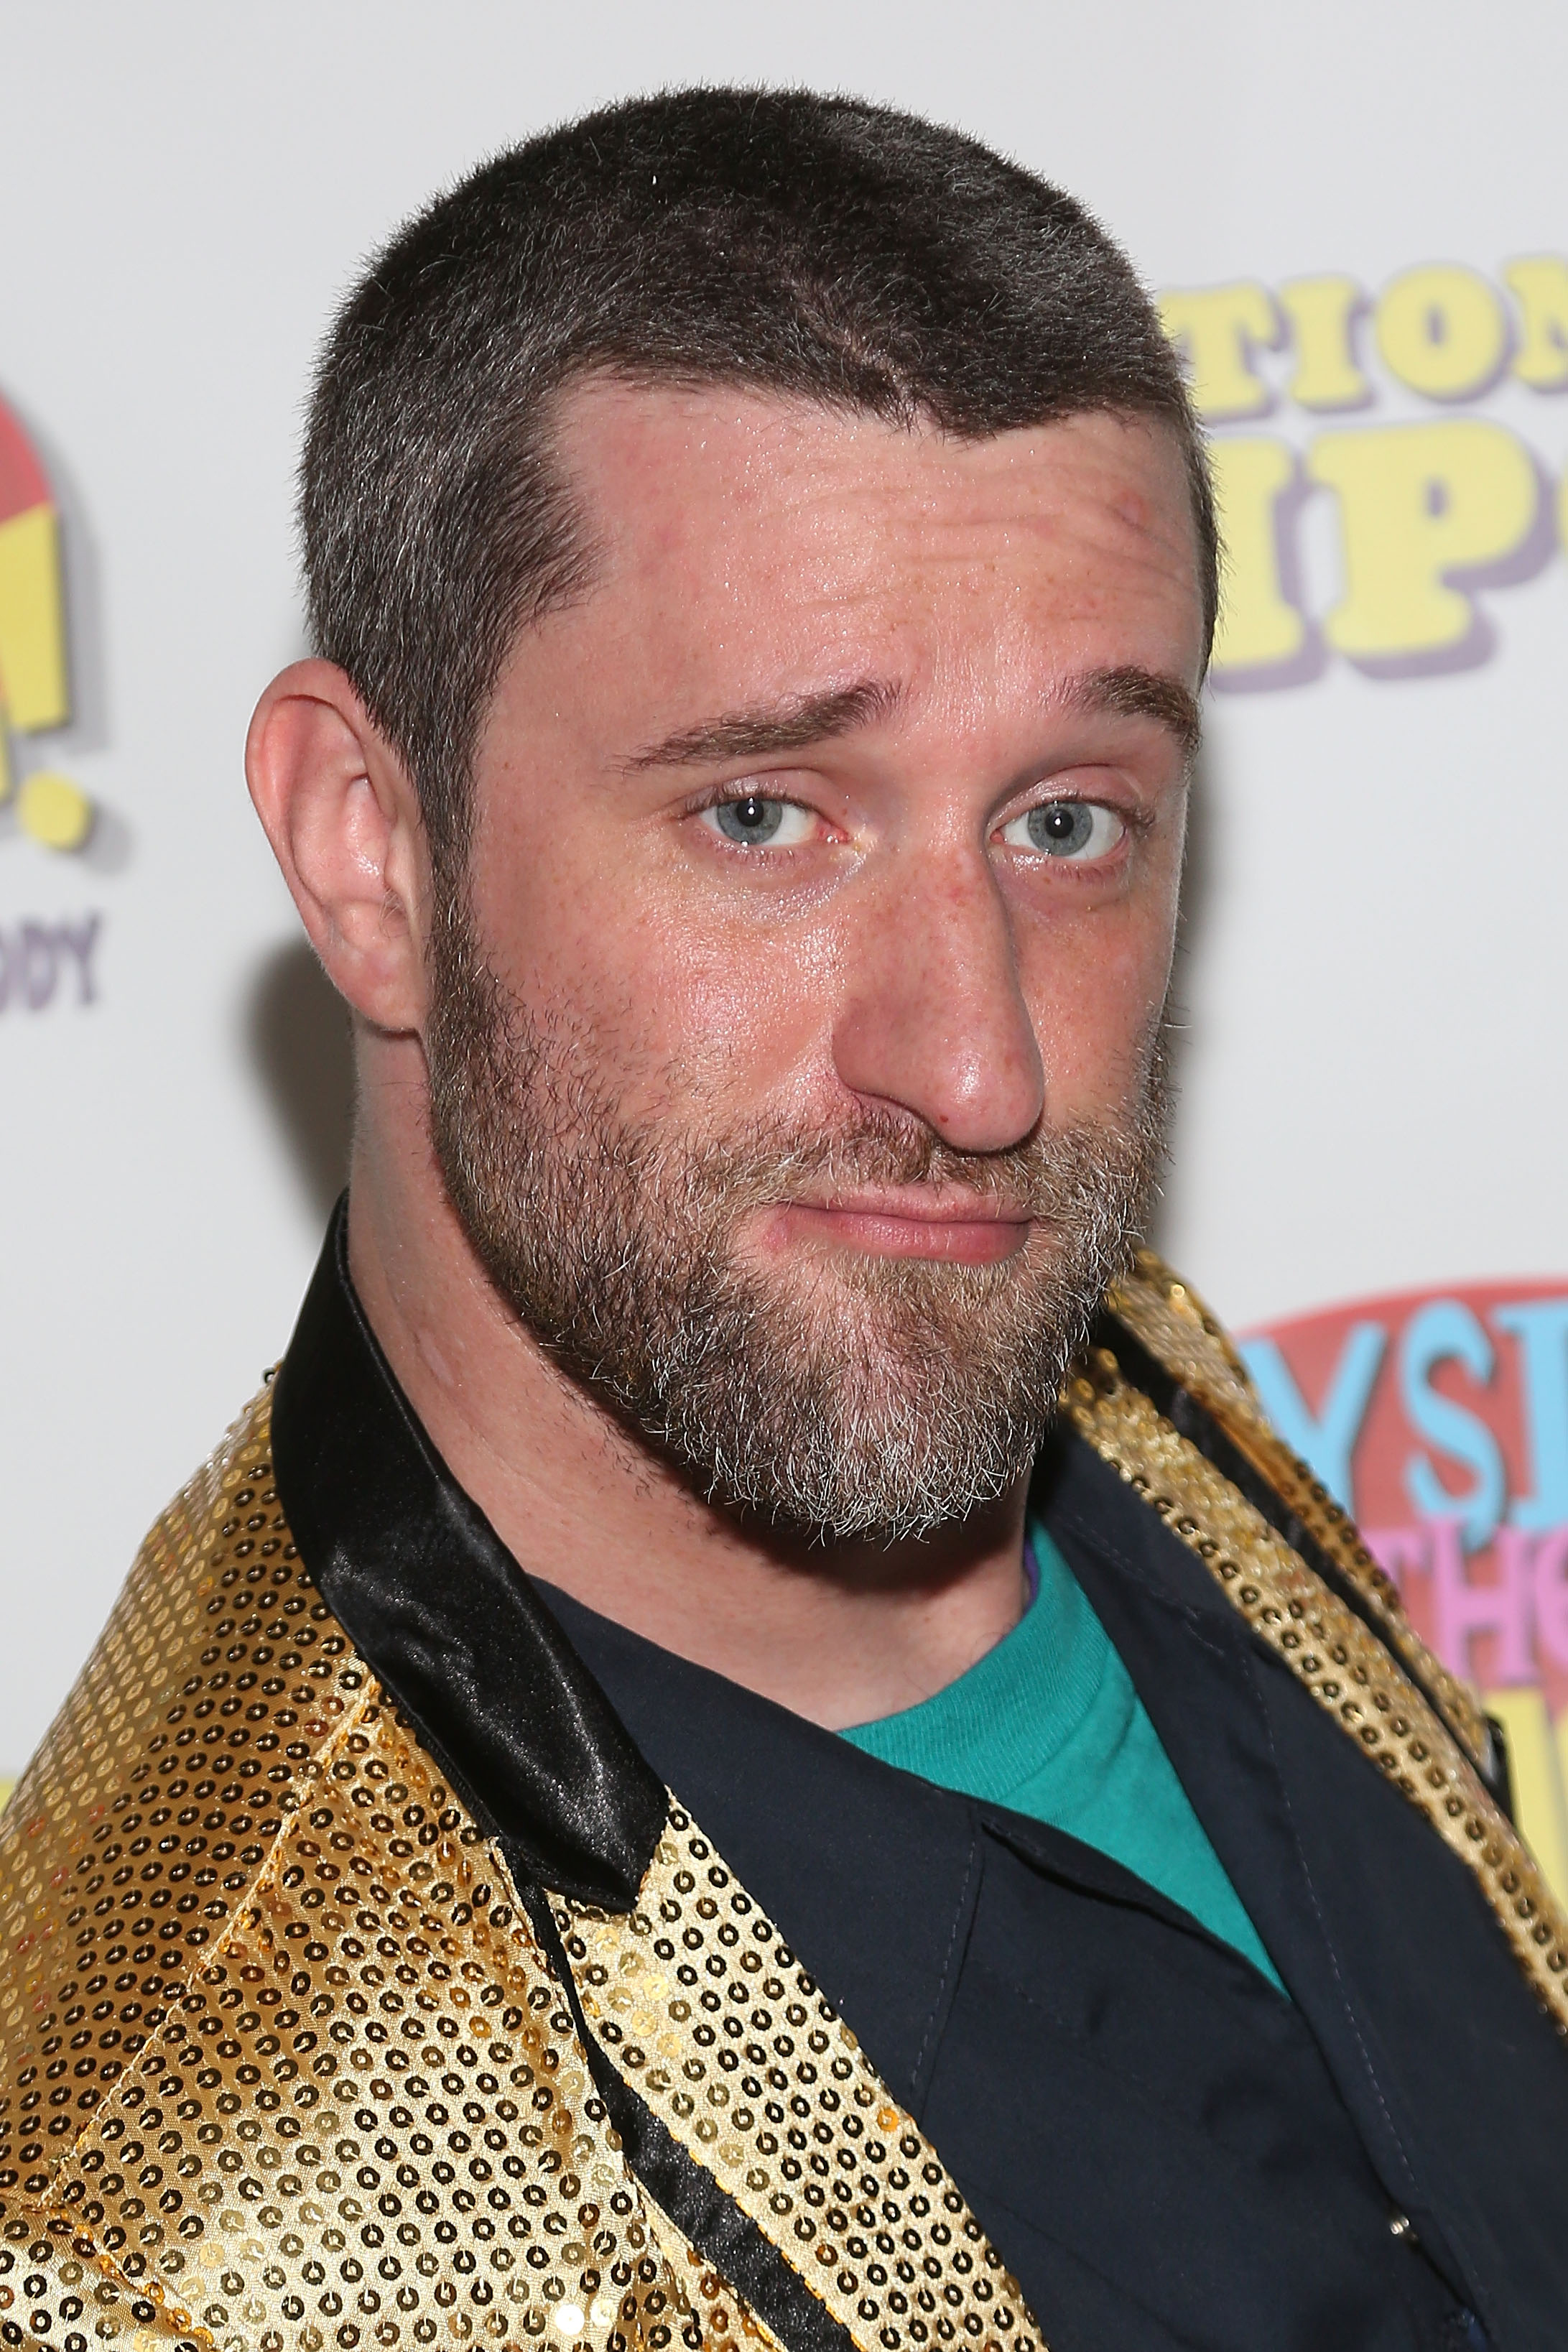 Actor Dustin Diamond attends the sold-out opening performance of "Bayside! The Musical!" at Theatre 80 St. Marks on Sept. 11, 2014 in New York City. (Taylor Hill—Getty Images)